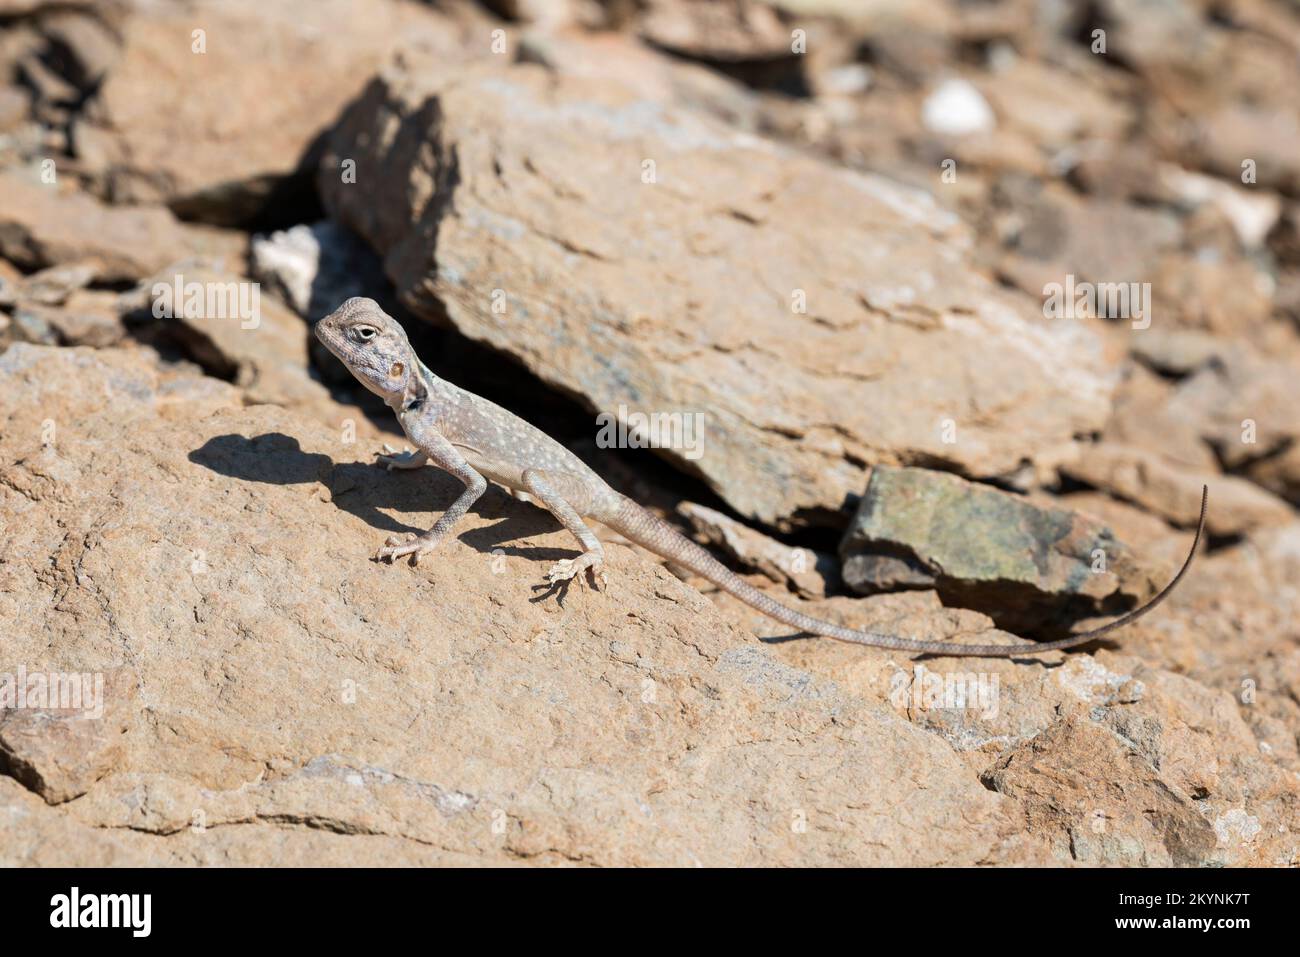 Lizard in his rocky habitat of the Hajar Mountains of the United Arab Emirates Stock Photo